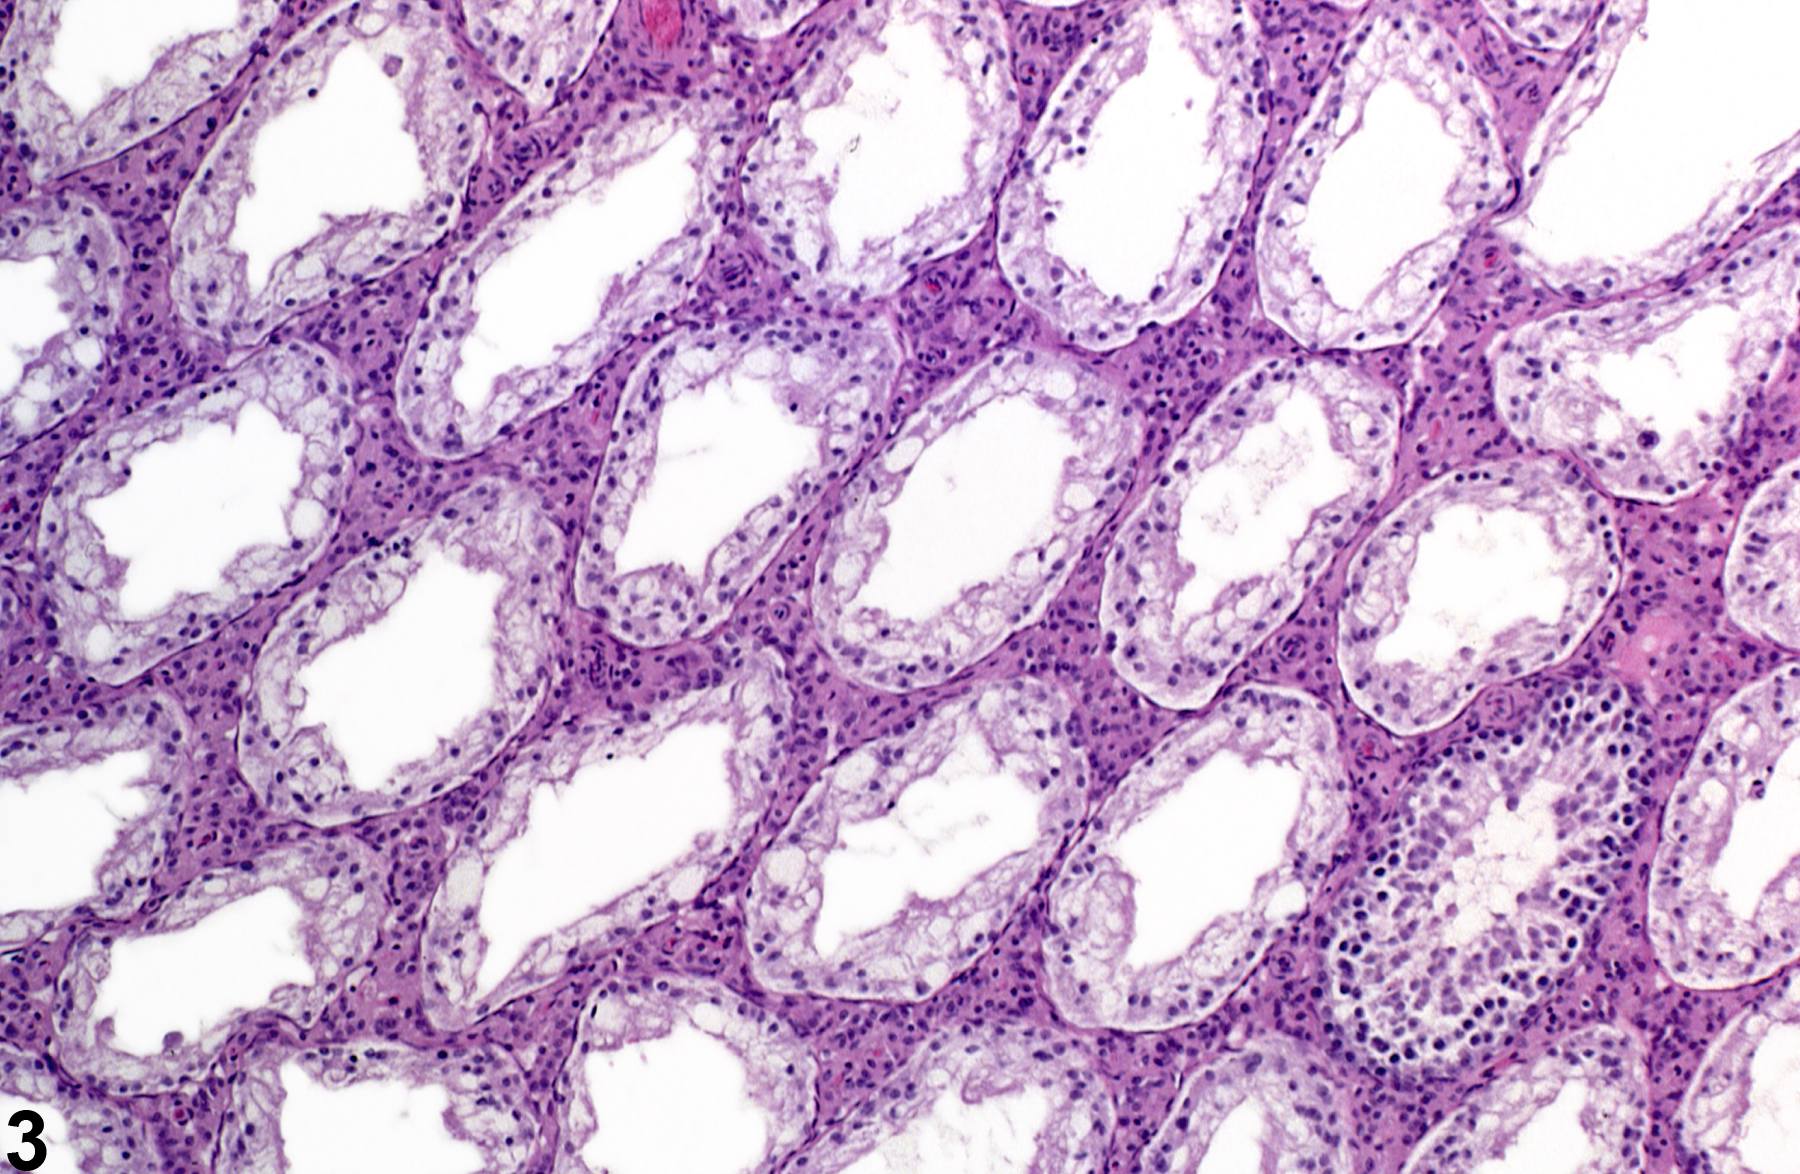 Image of germinal epithelium atrophy in the testis from a male F344/N rat in a chronic study